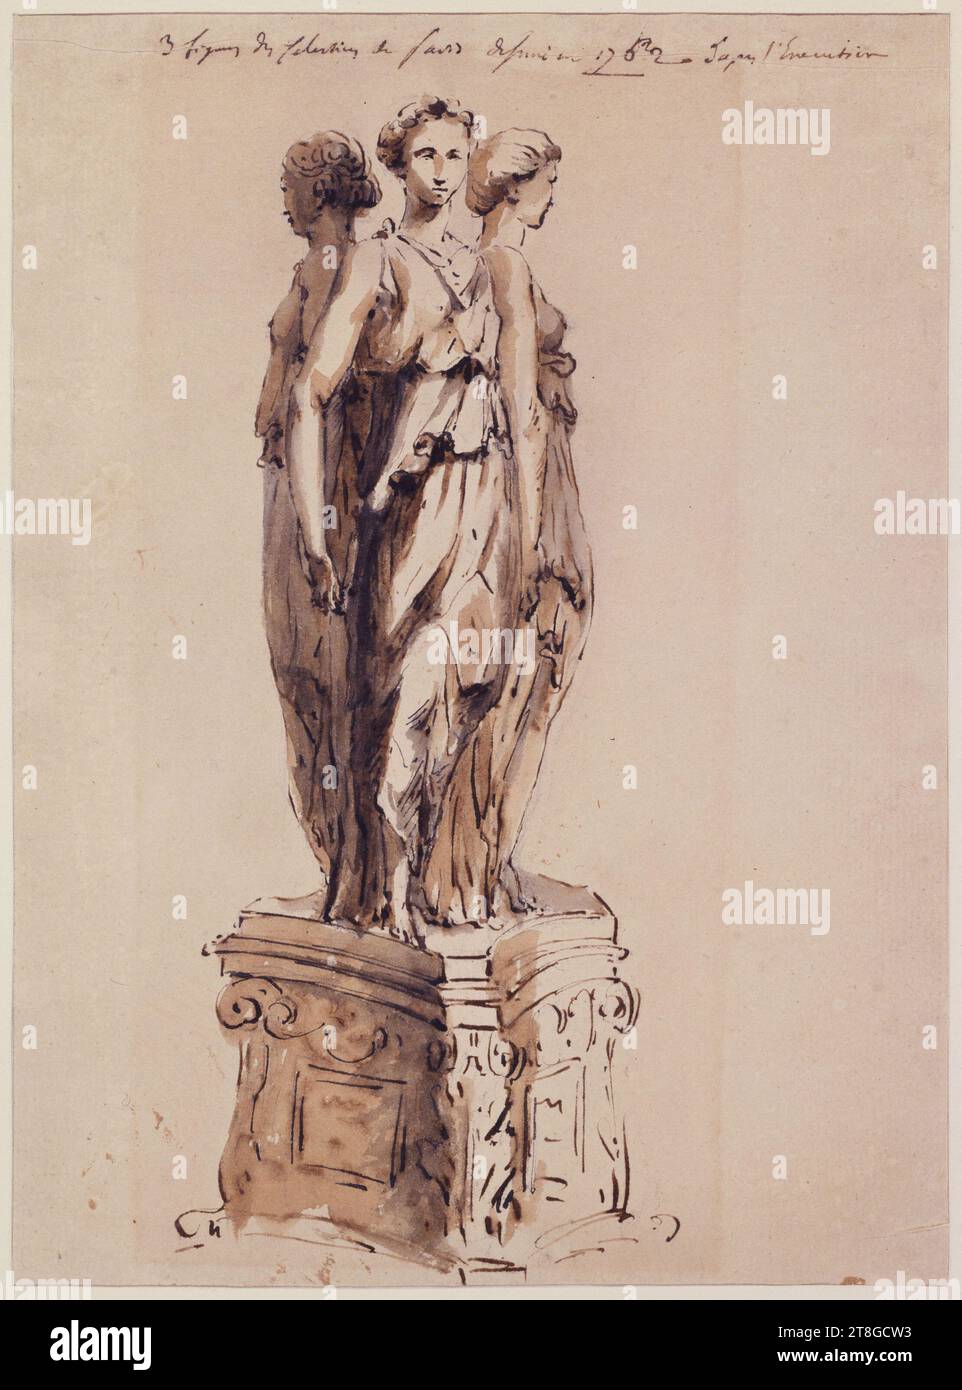 Monument to the Heart of Henry II, Draughtsman, Drawing, Graphic arts, Drawing, Graphite, Pen (graphic arts), Brown ink, Wash, Dimensions - Work: Height: 21.6 cm, Width: 15.9 cm, Dimensions - Mounting:, Height: 50 cm, Width: 40 cm Stock Photo